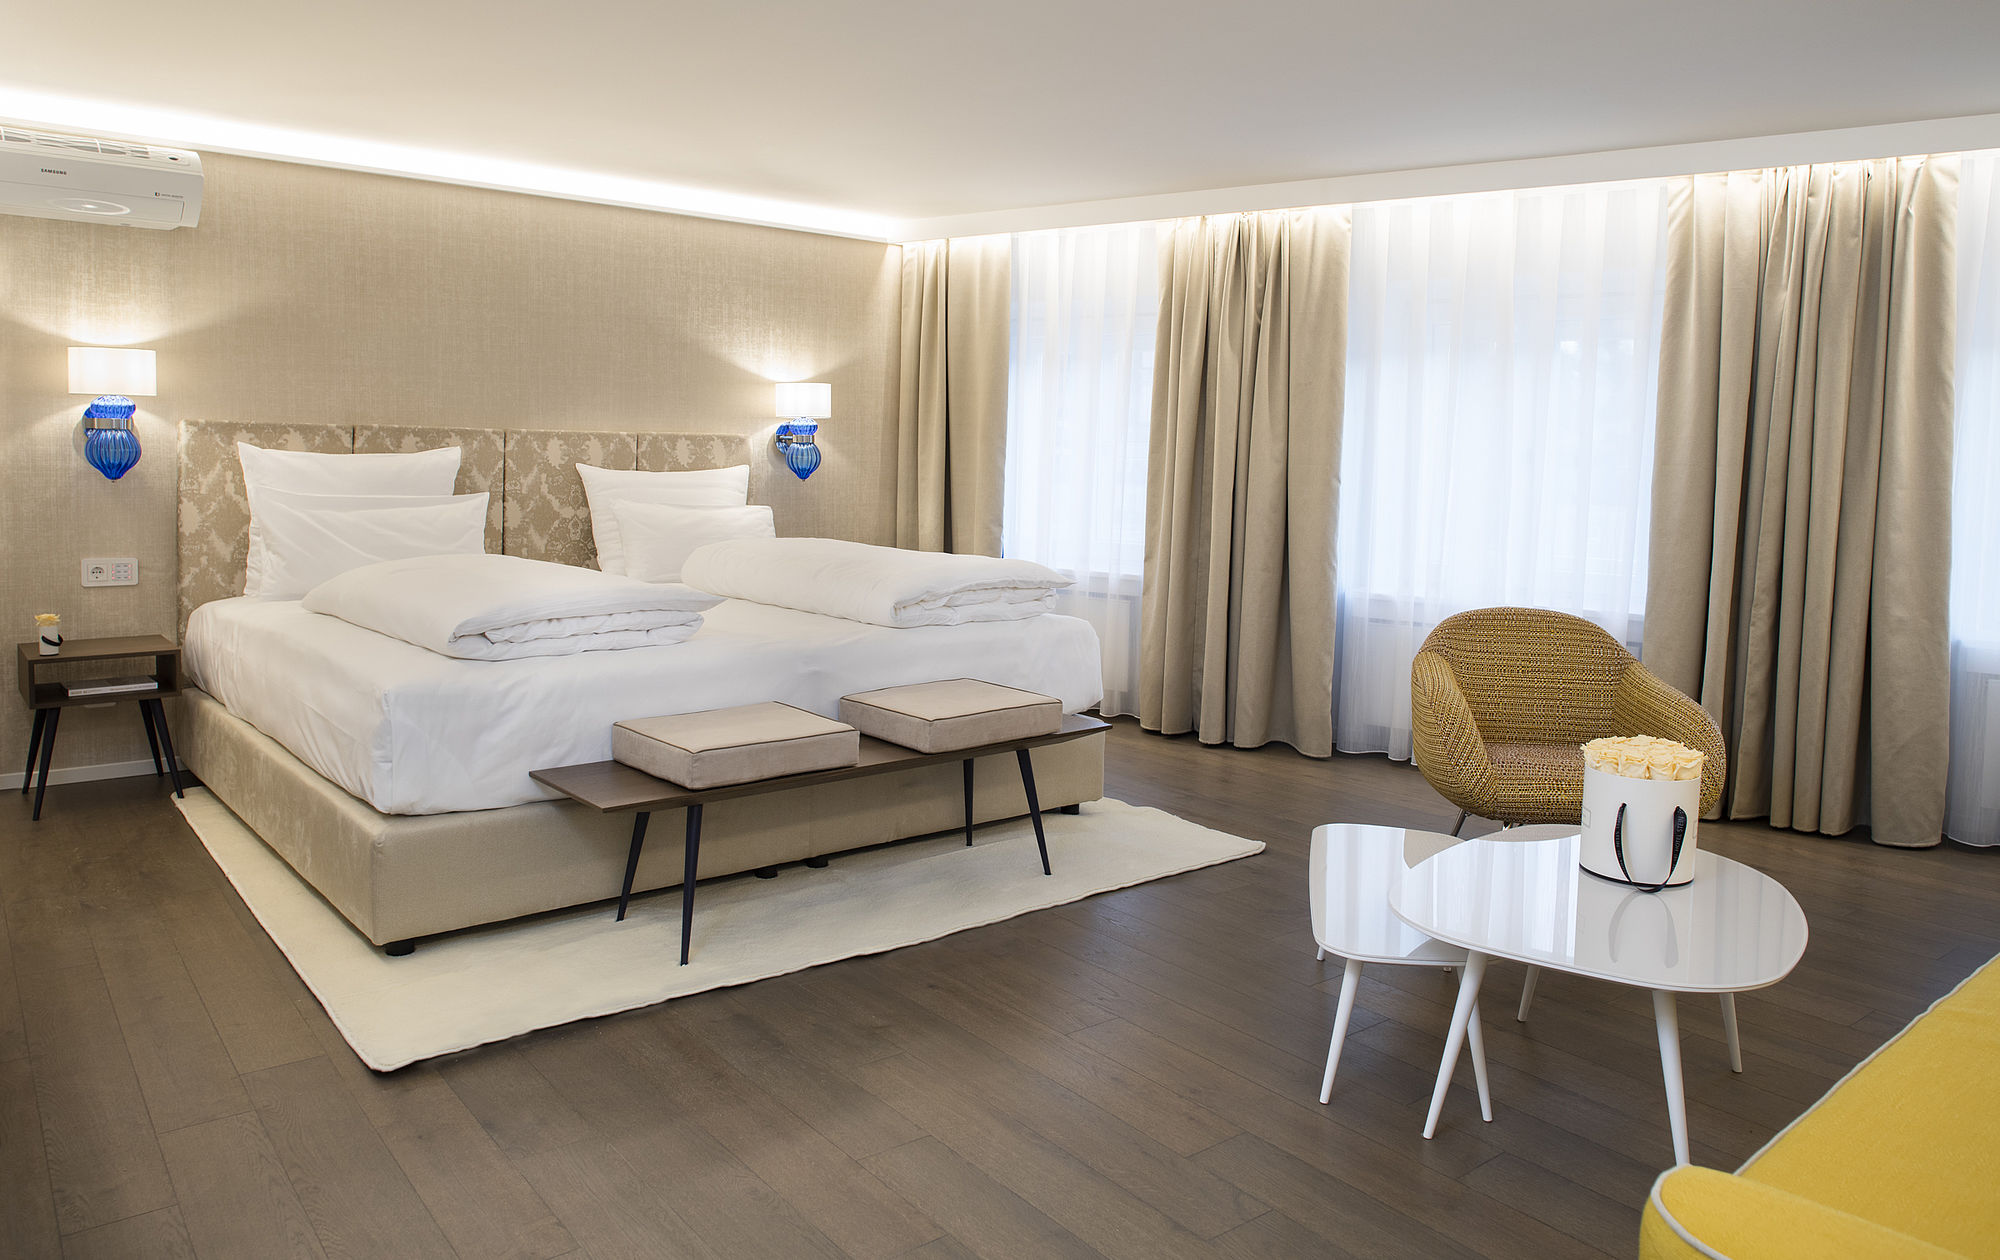 The bedroom of the hotel suite in a light gold-beige design, large pieces of furniture and lots of open space